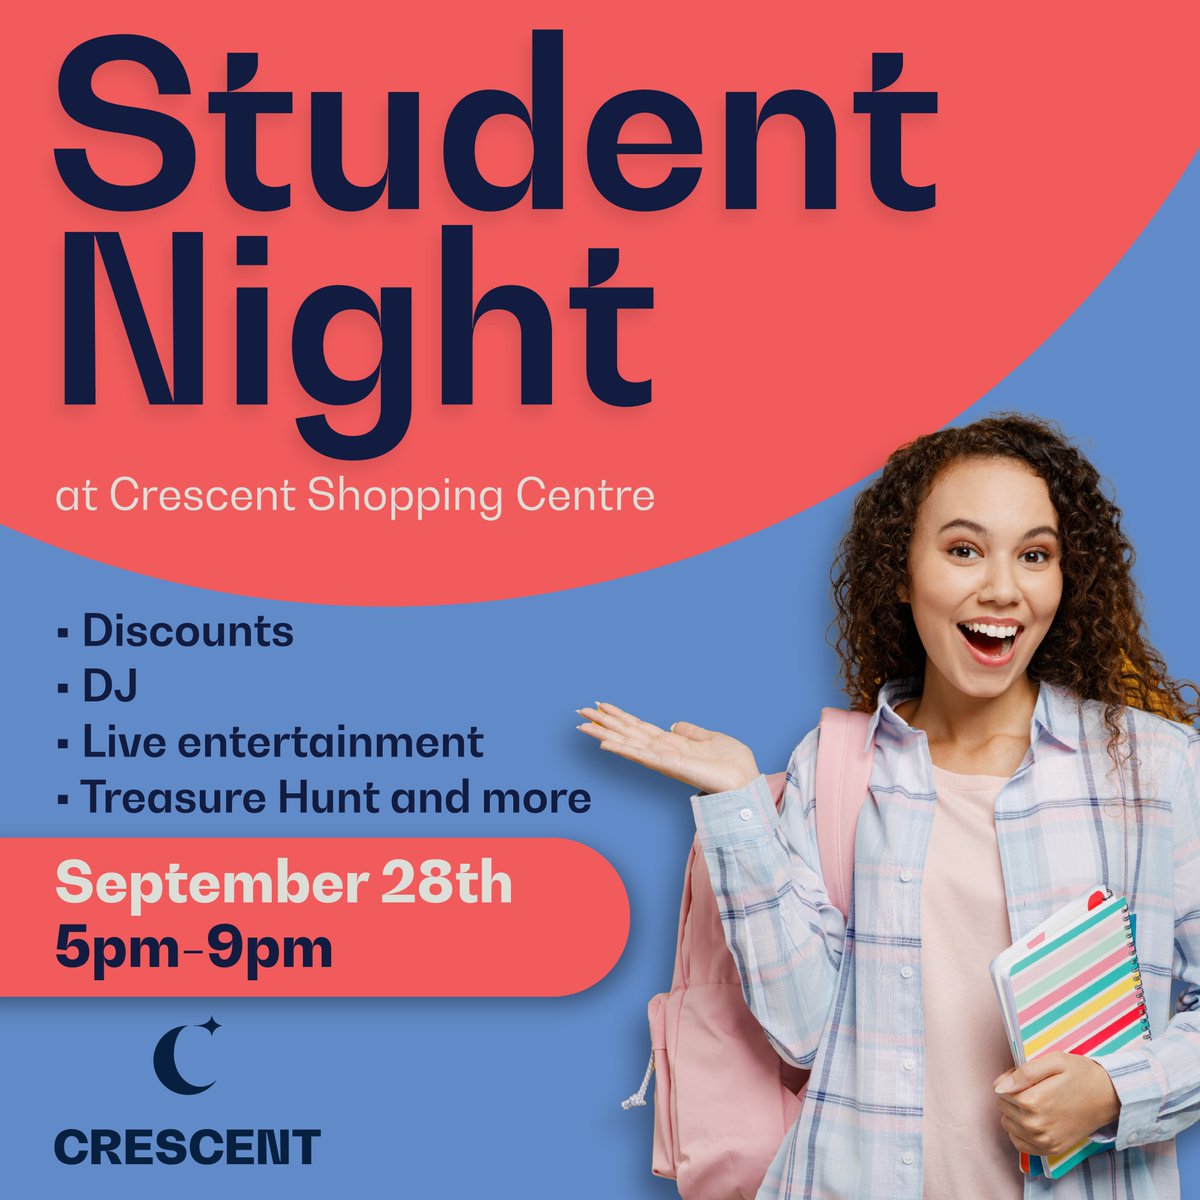 Student Night at Crescent Shopping Centre is this Thursday 28th Sept. Join us from 5pm-9pm for an evening of discounts and live entertainment!